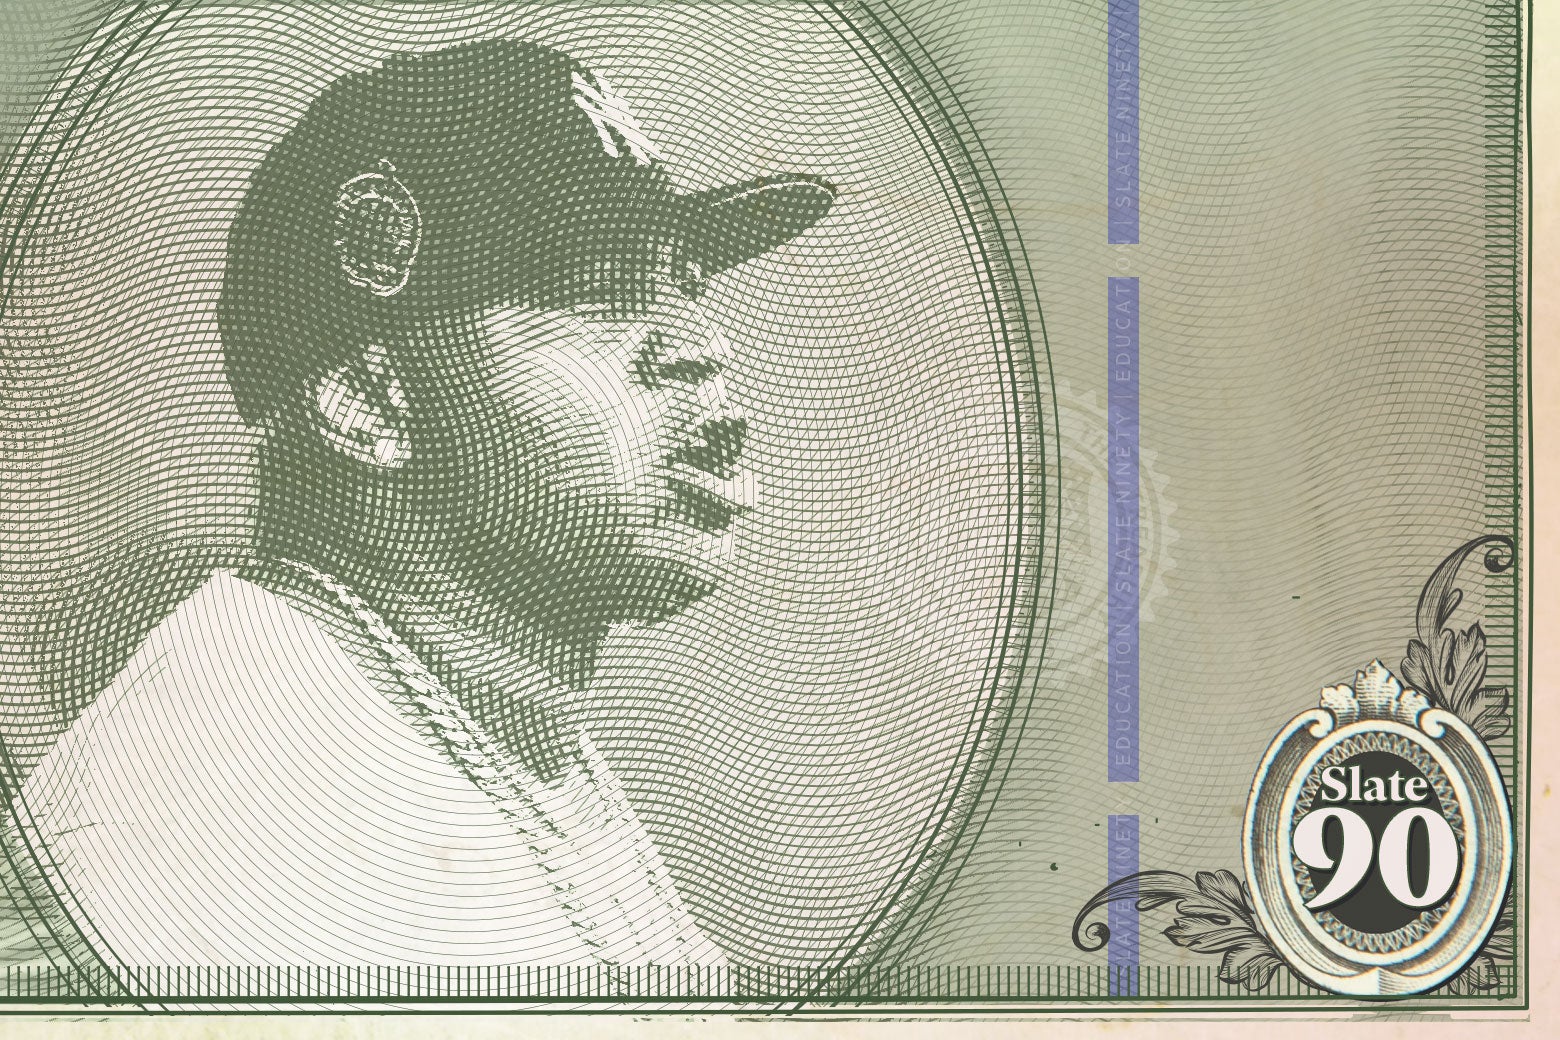 Paper currency showing LL Cool J.